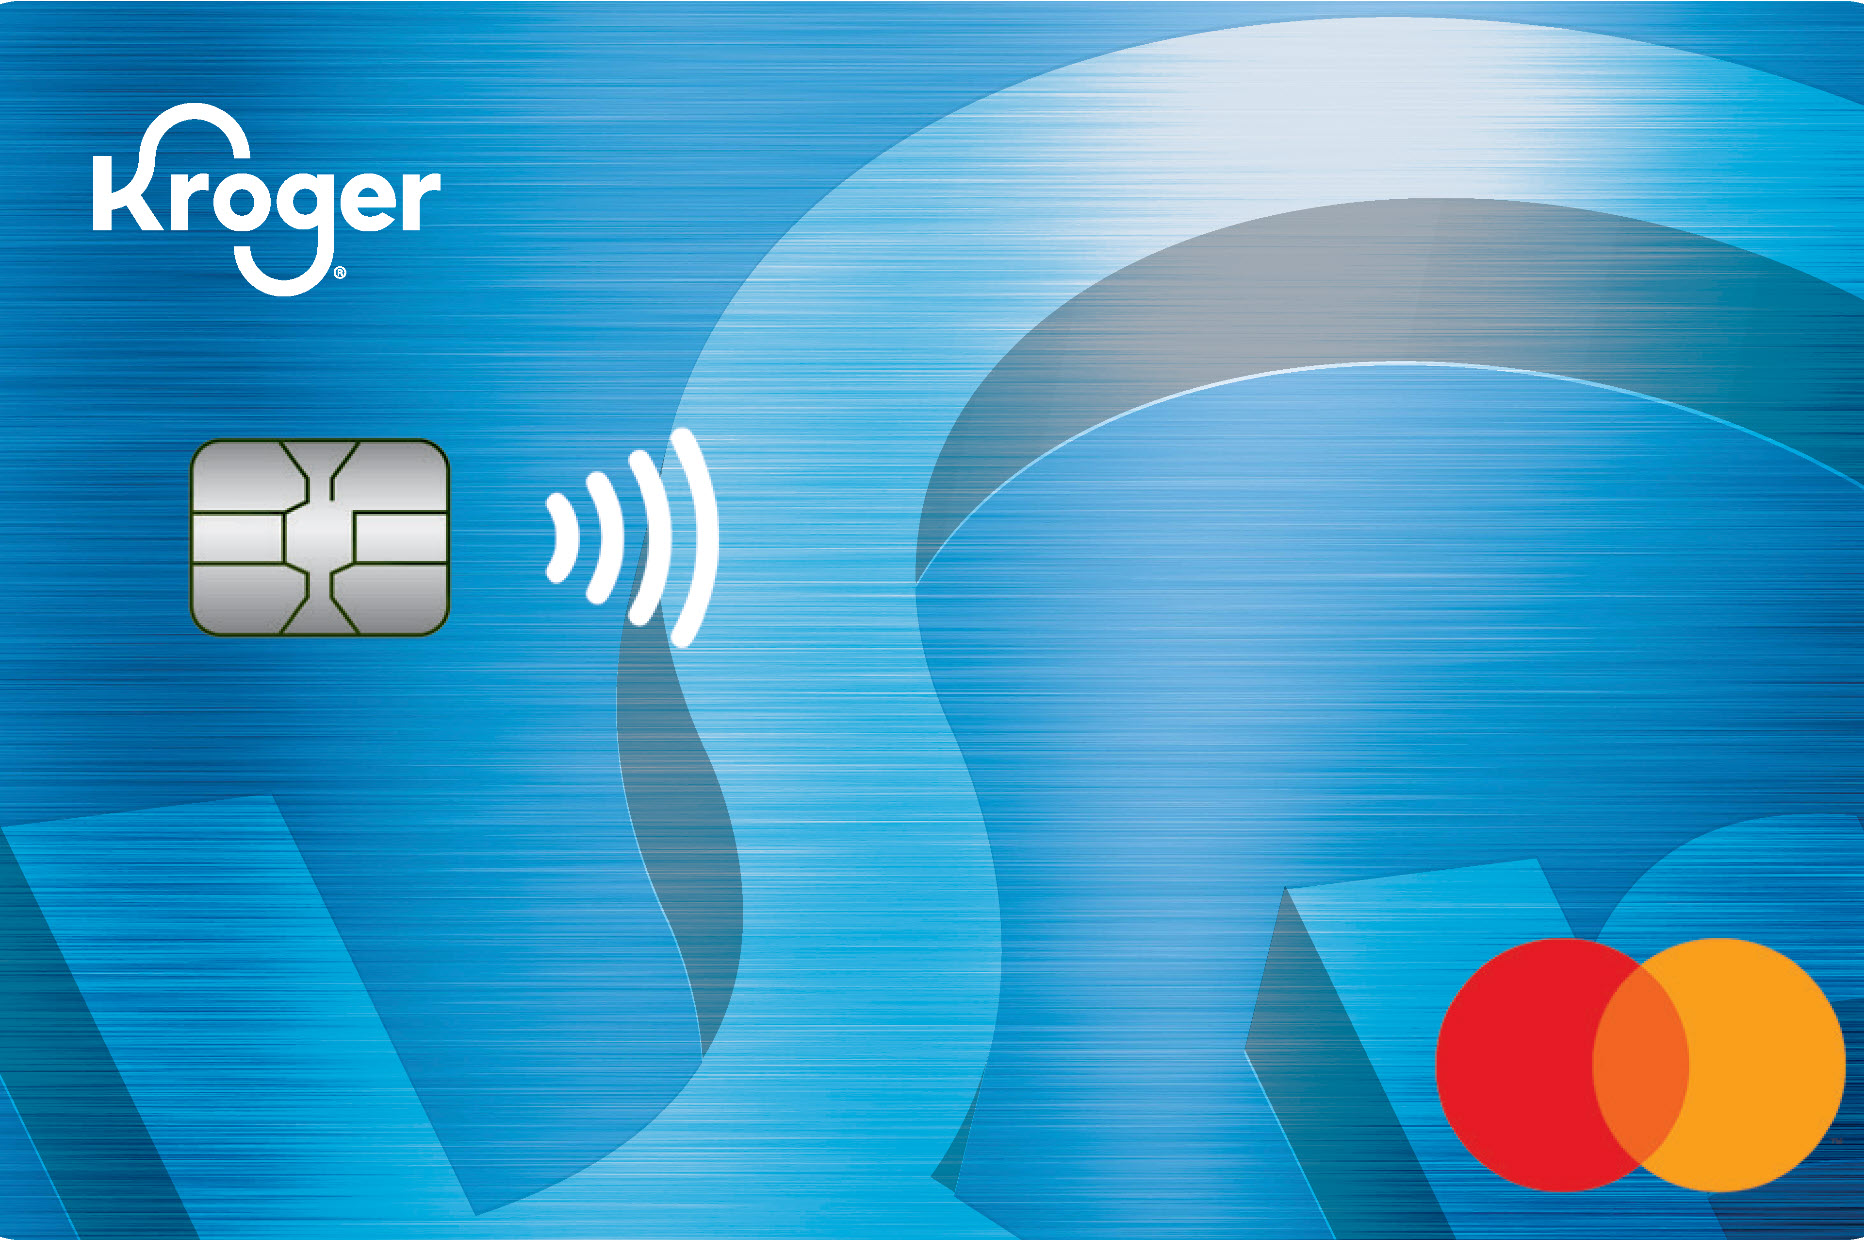 U.S. Bank and Kroger Co. offer new credit card rewards and fuel ...